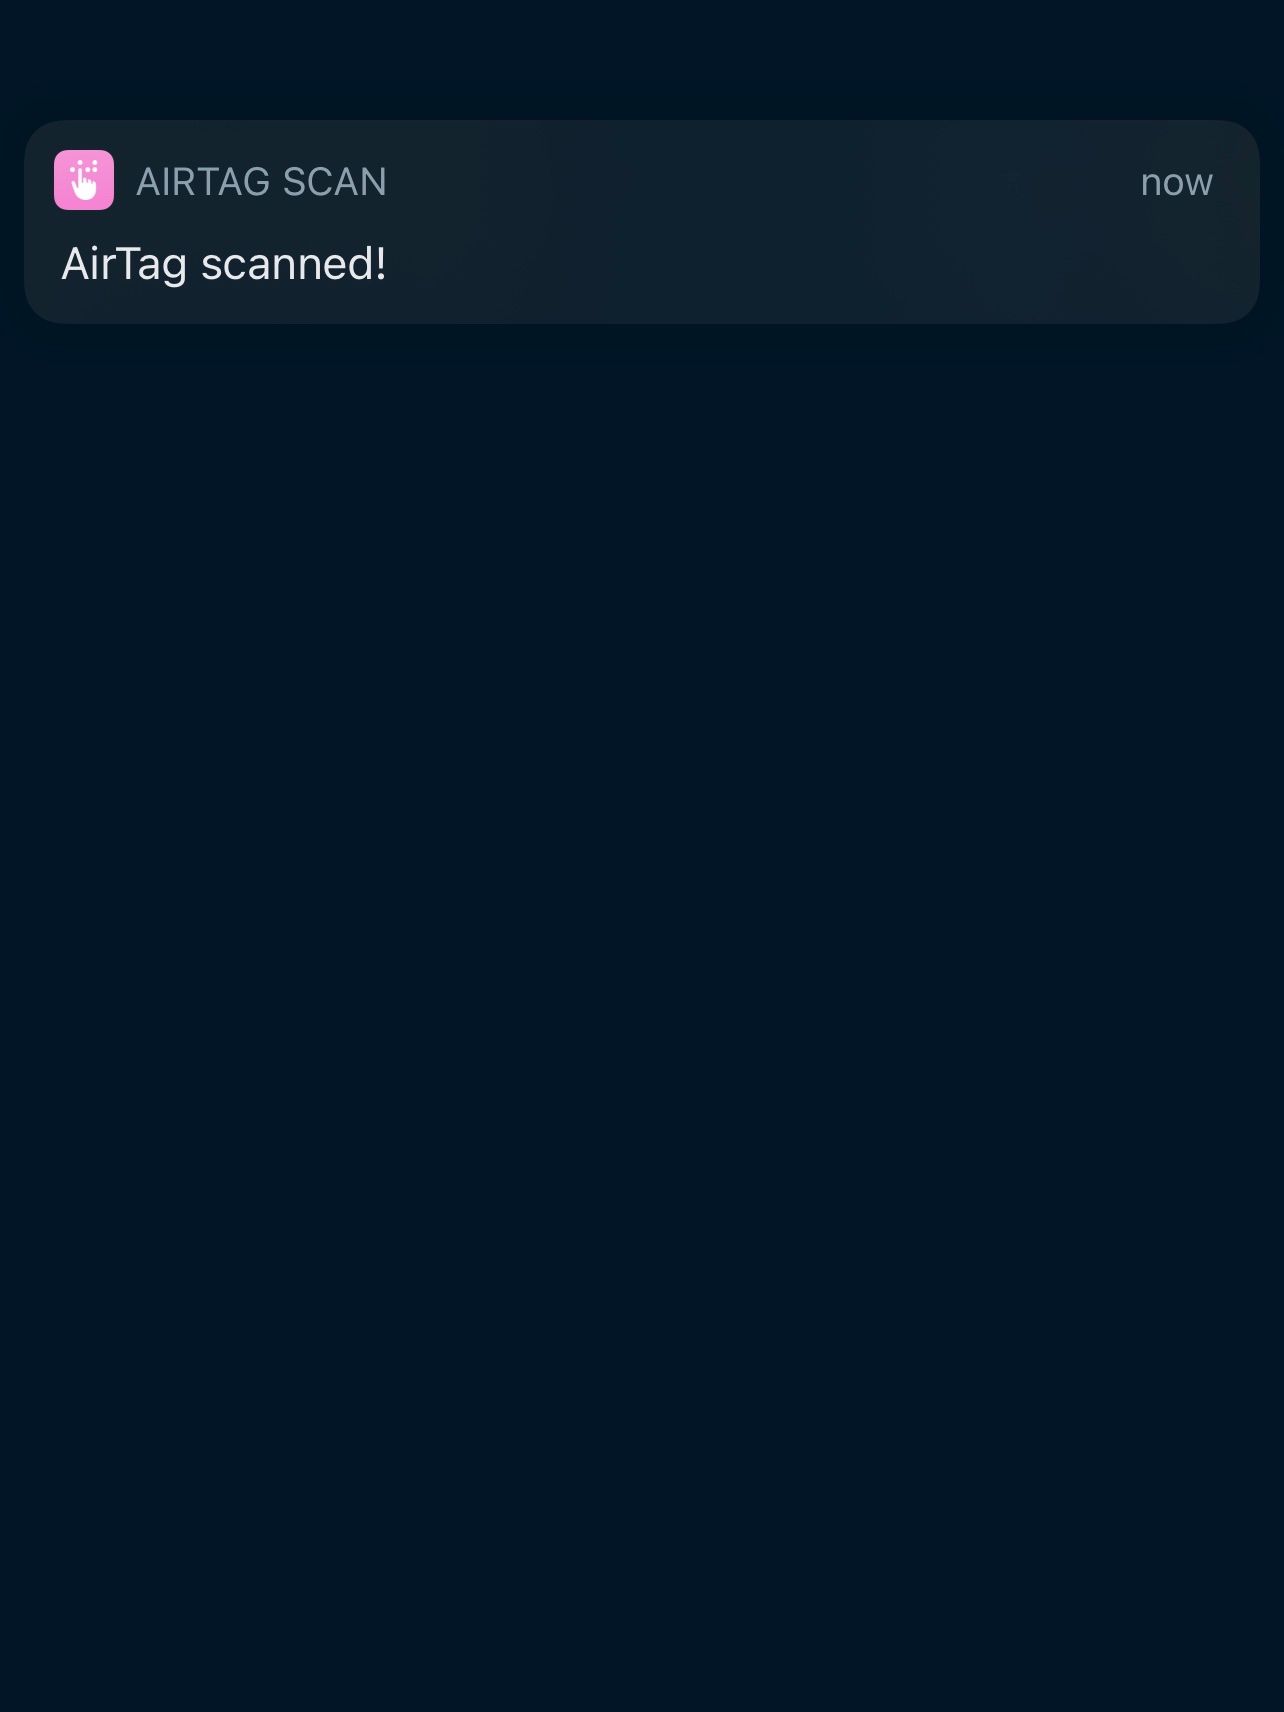 AirTag scanned test notification from Shortcuts